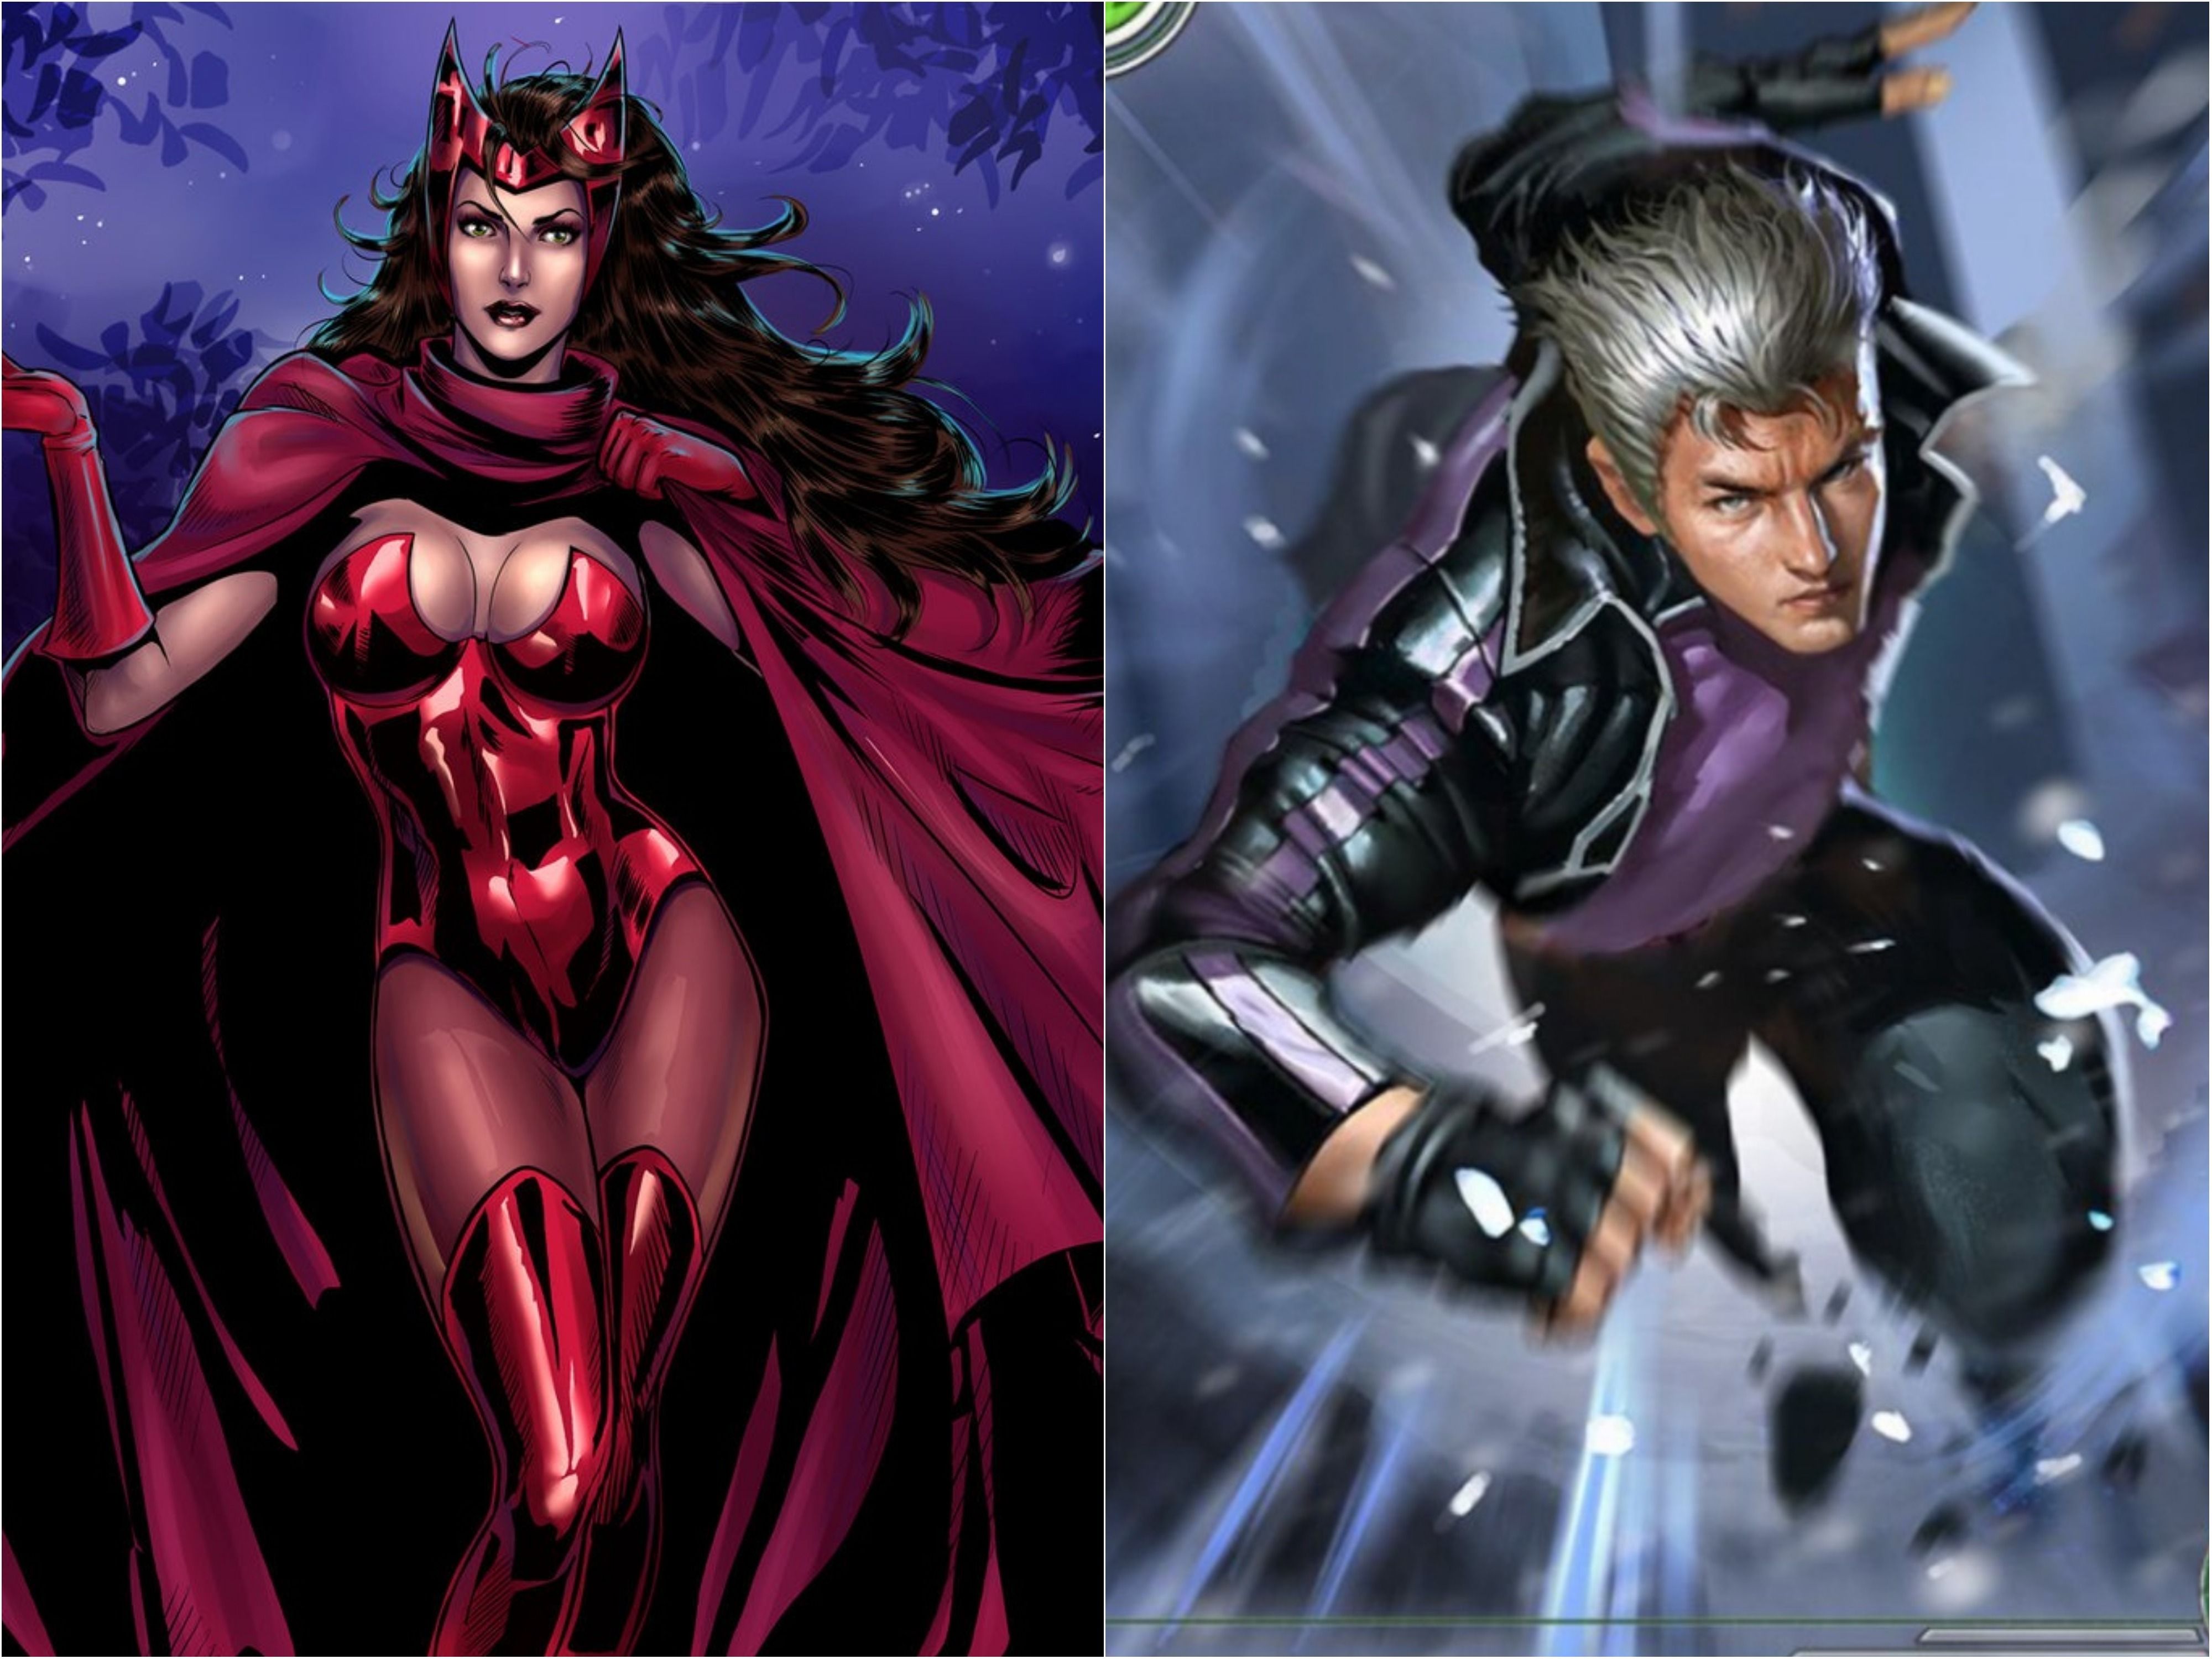 Scarlet Witch and Quicksilver